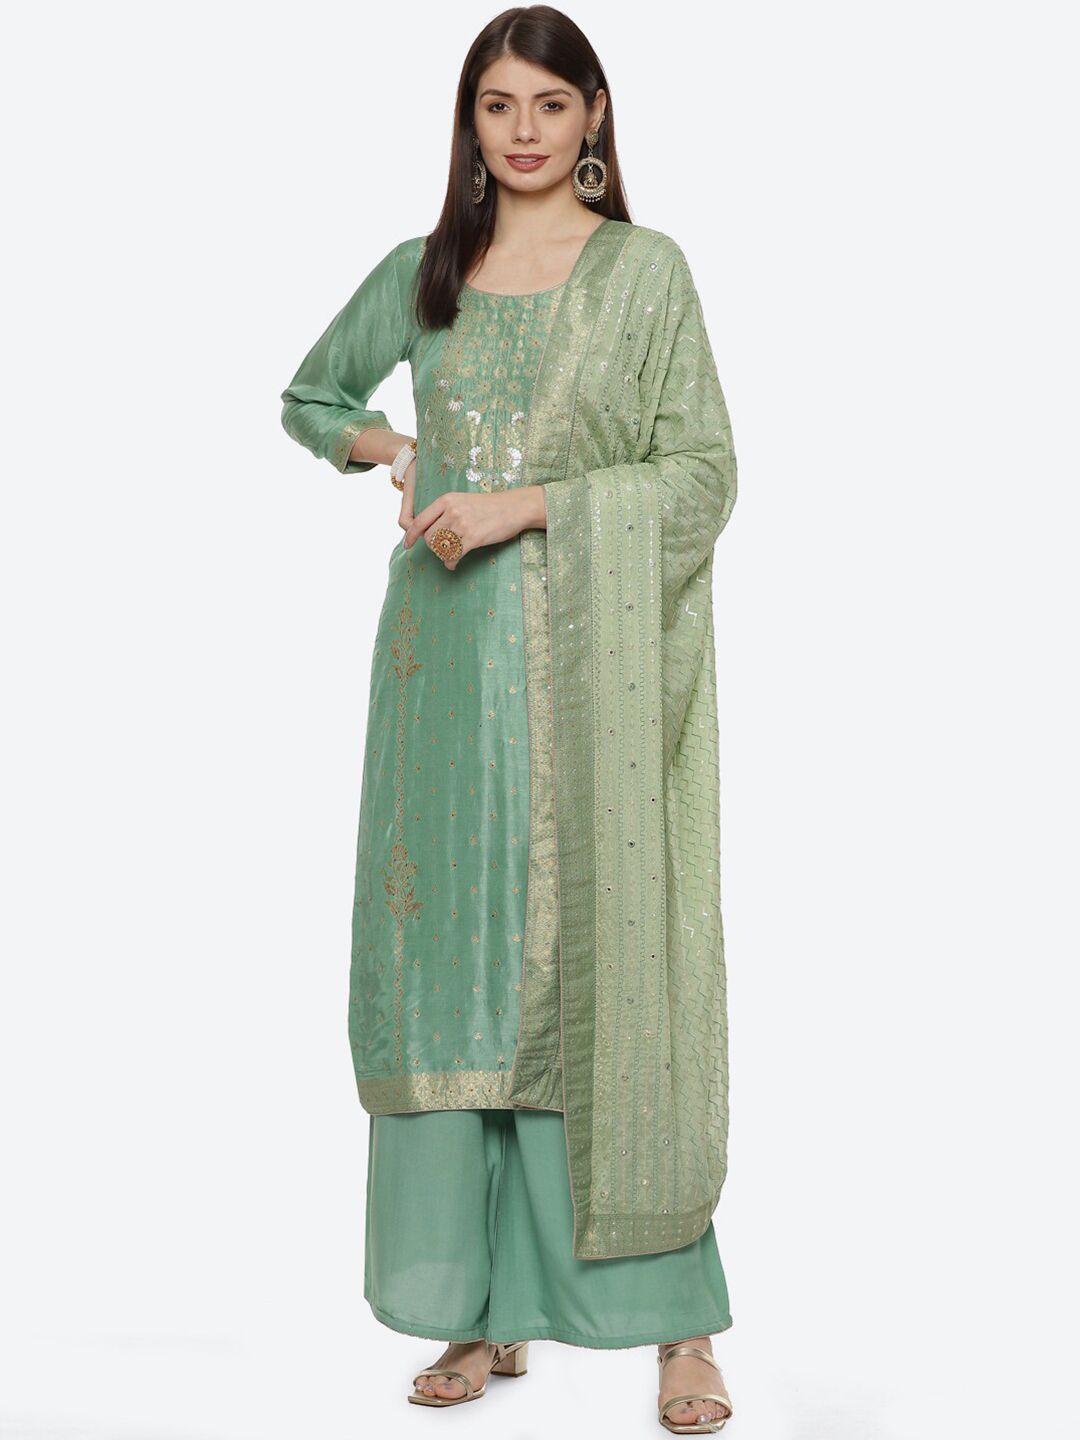 Biba Women Green & Gold-Toned Printed Unstitched Dress Material Price in India